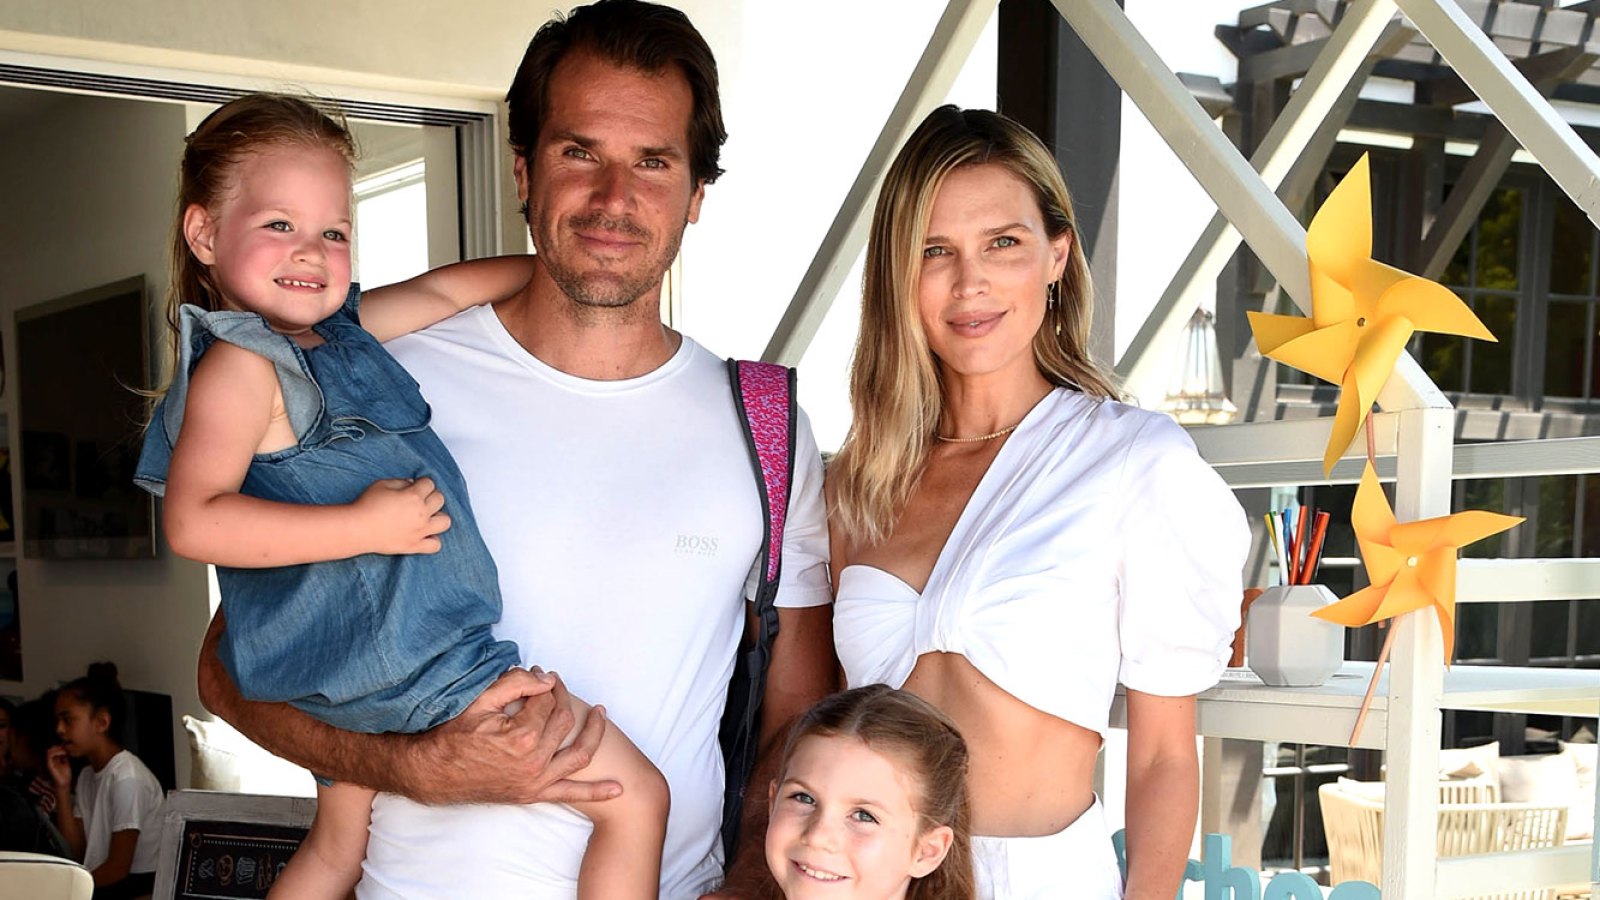 Sara Foster's Husband Tommy Haas Is 'Not Impressed' With Her Body